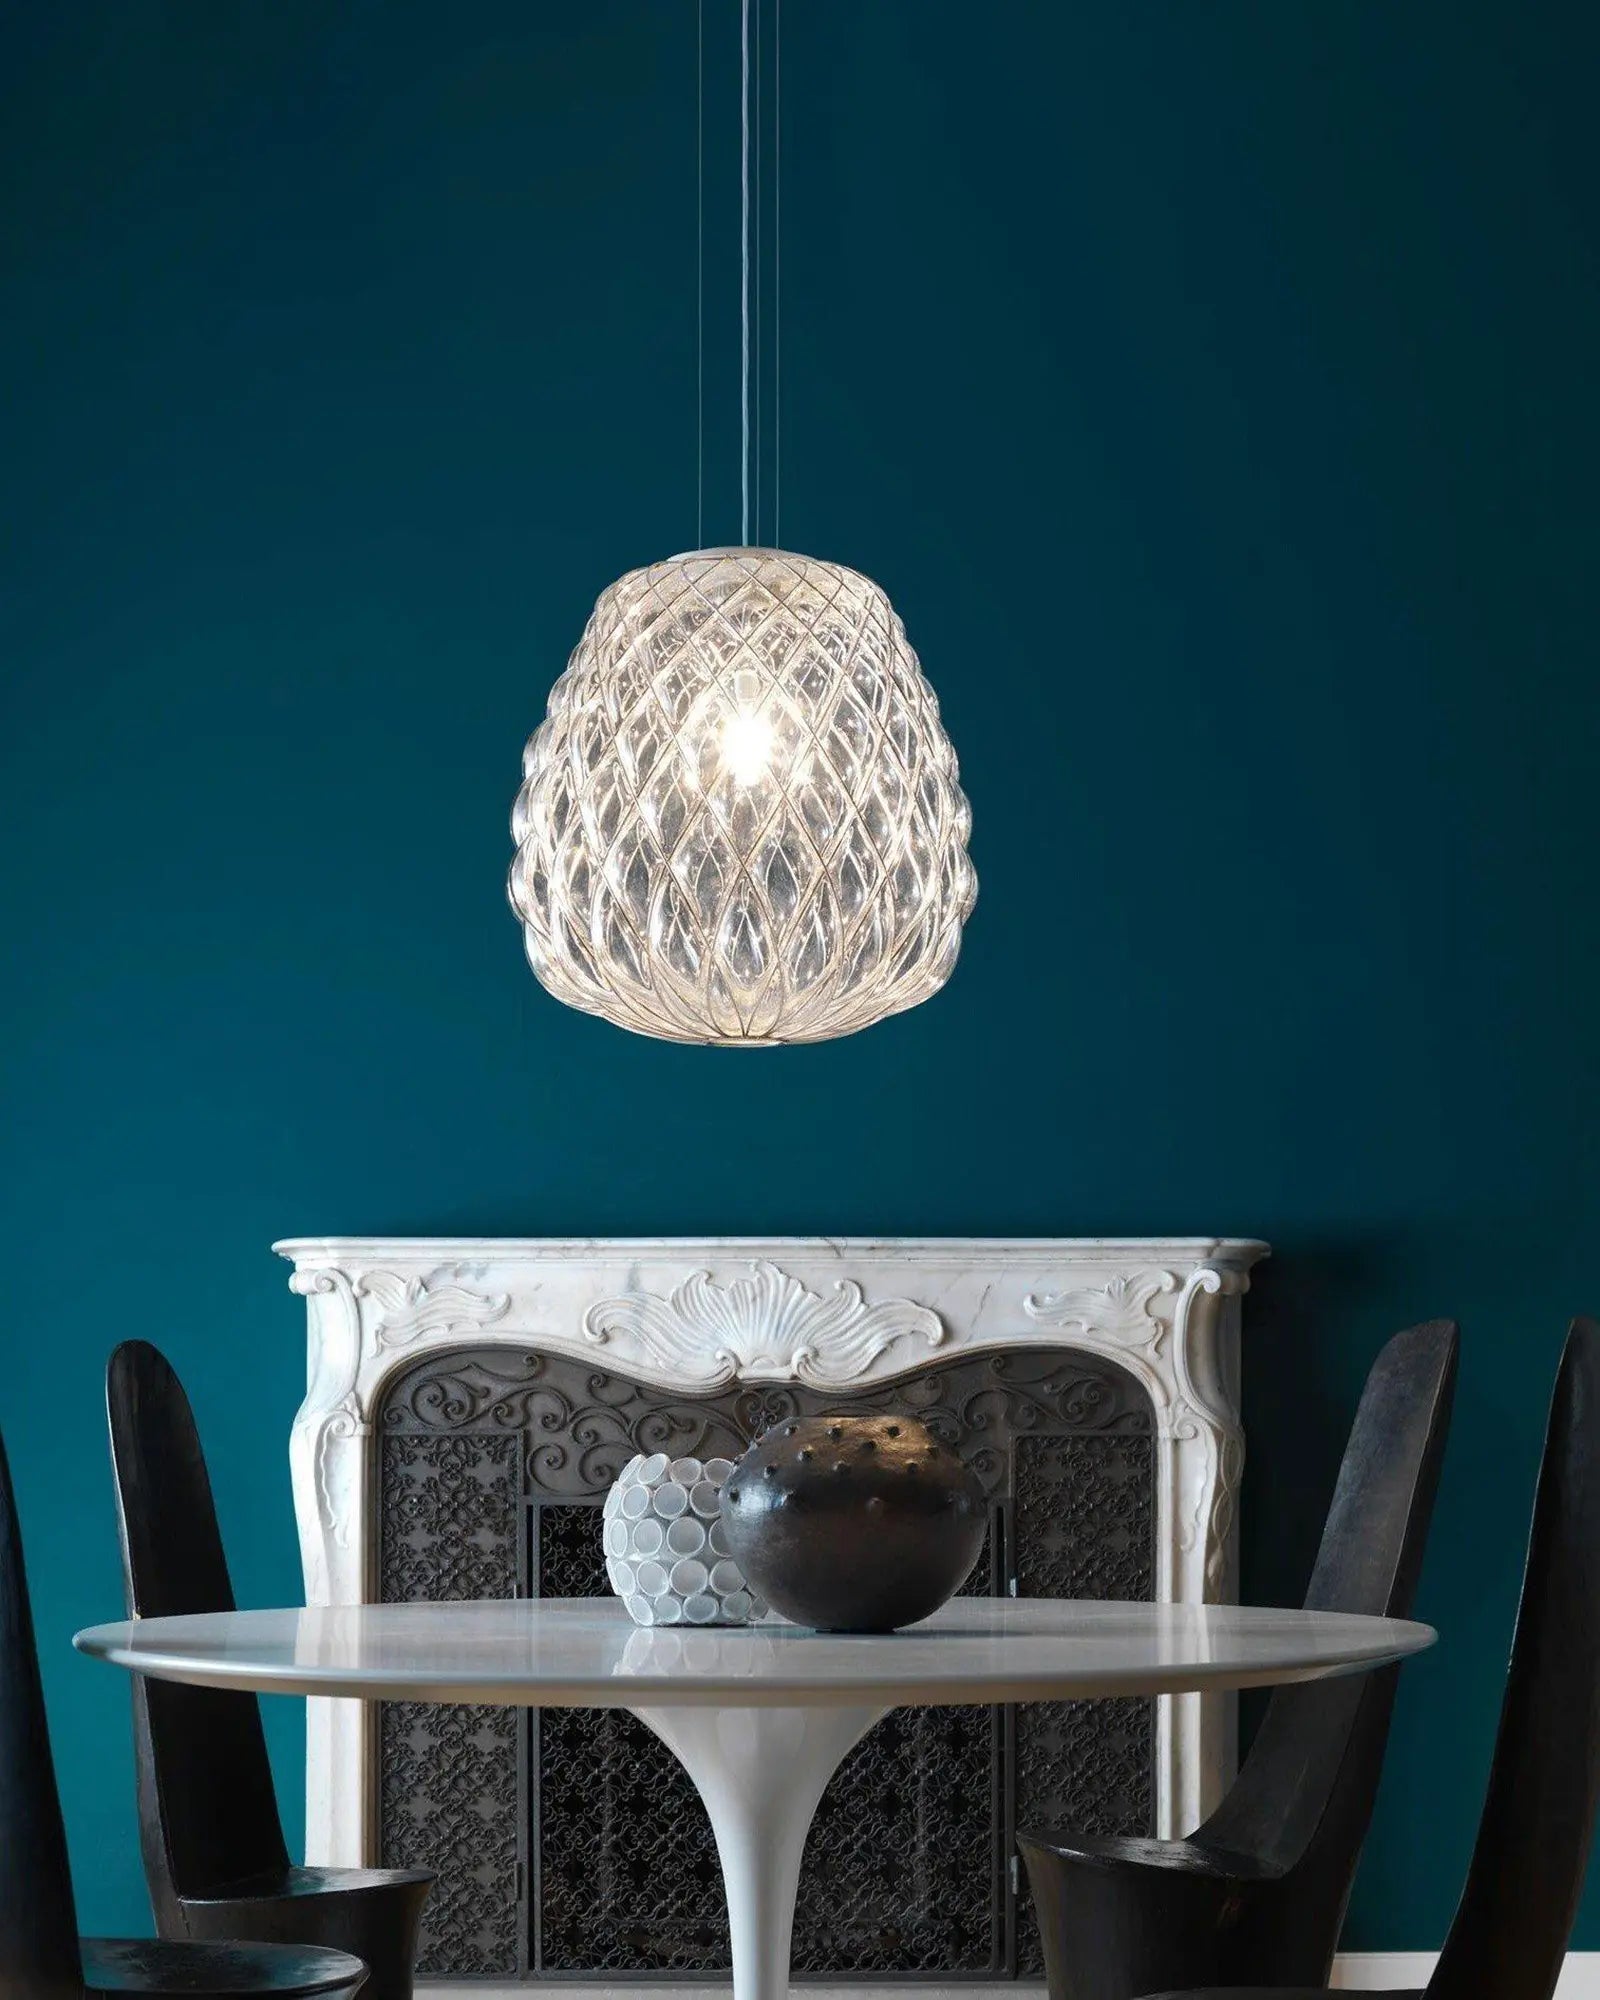 Pinecone pendant light above a table